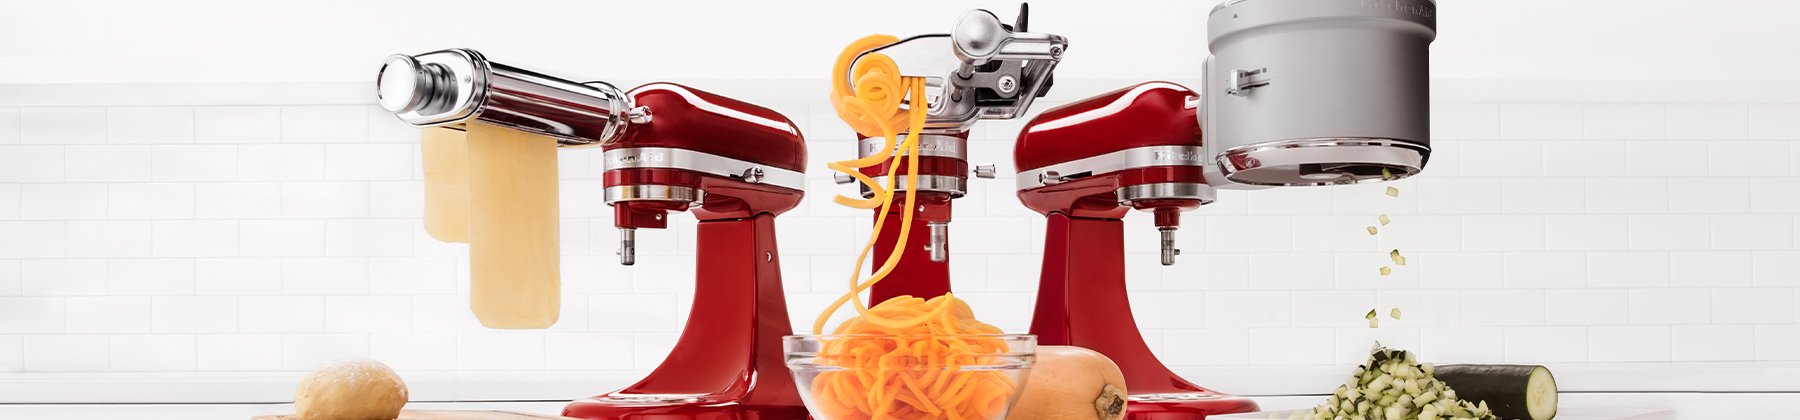 KitchenAid Mixer Accessories Food Processing Appliance Accessories and Parts  - KSMPEXTA